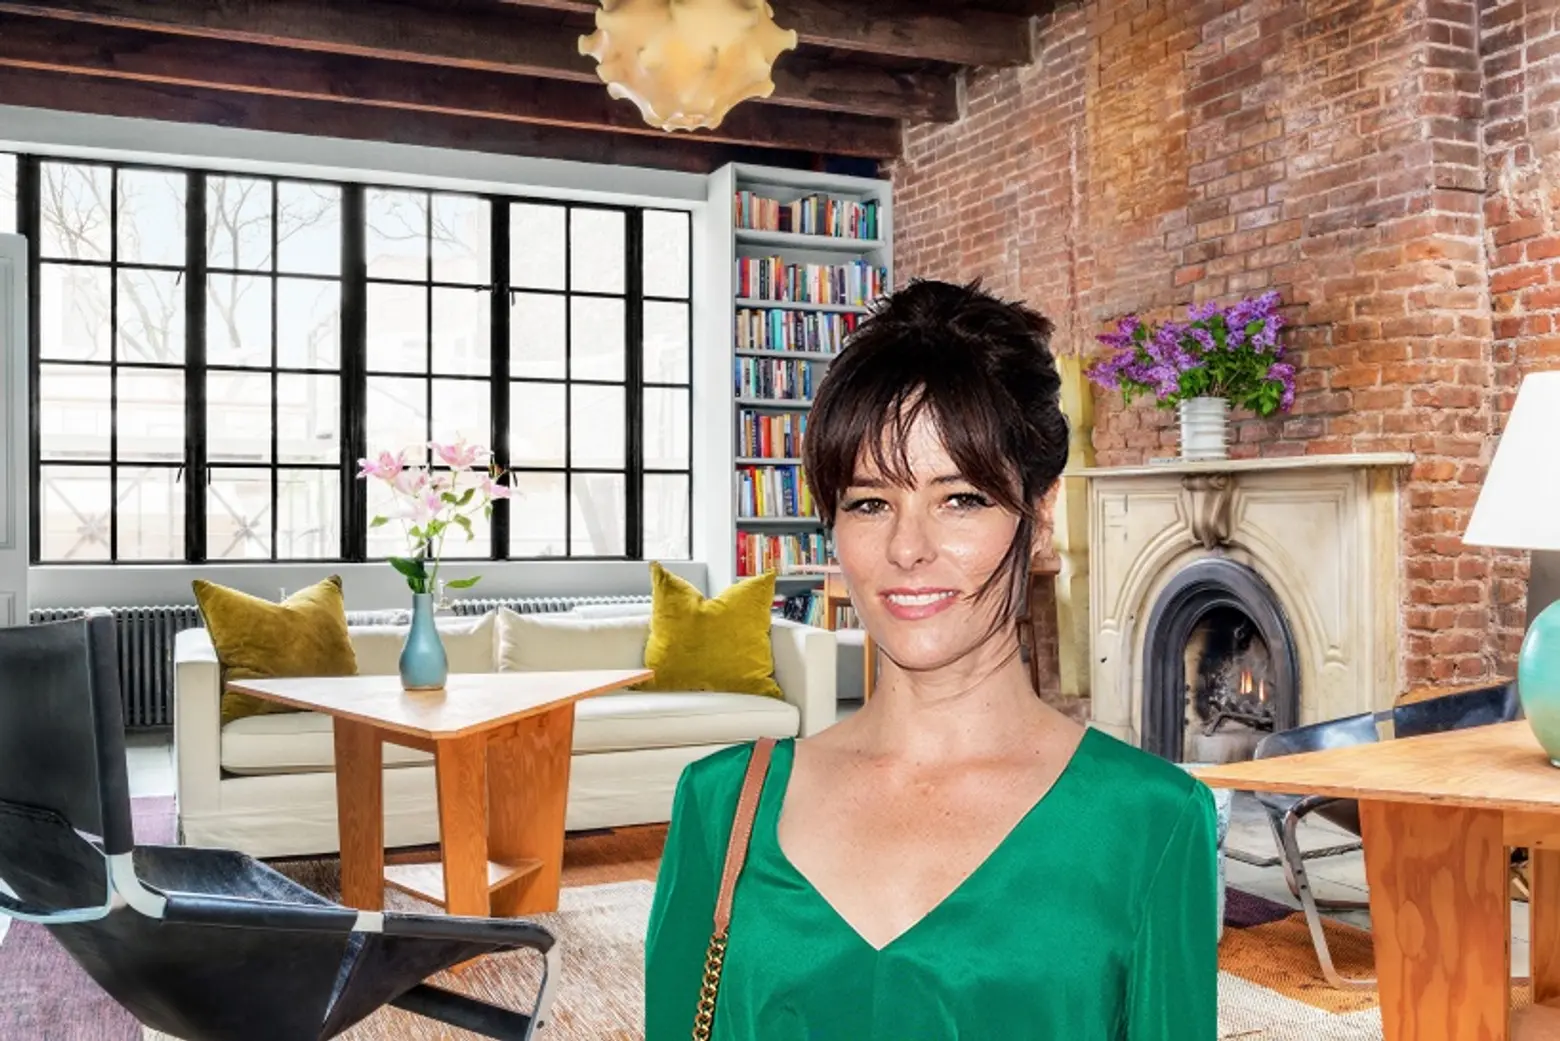 Live in Parker Posey’s former East Village co-op for $2M